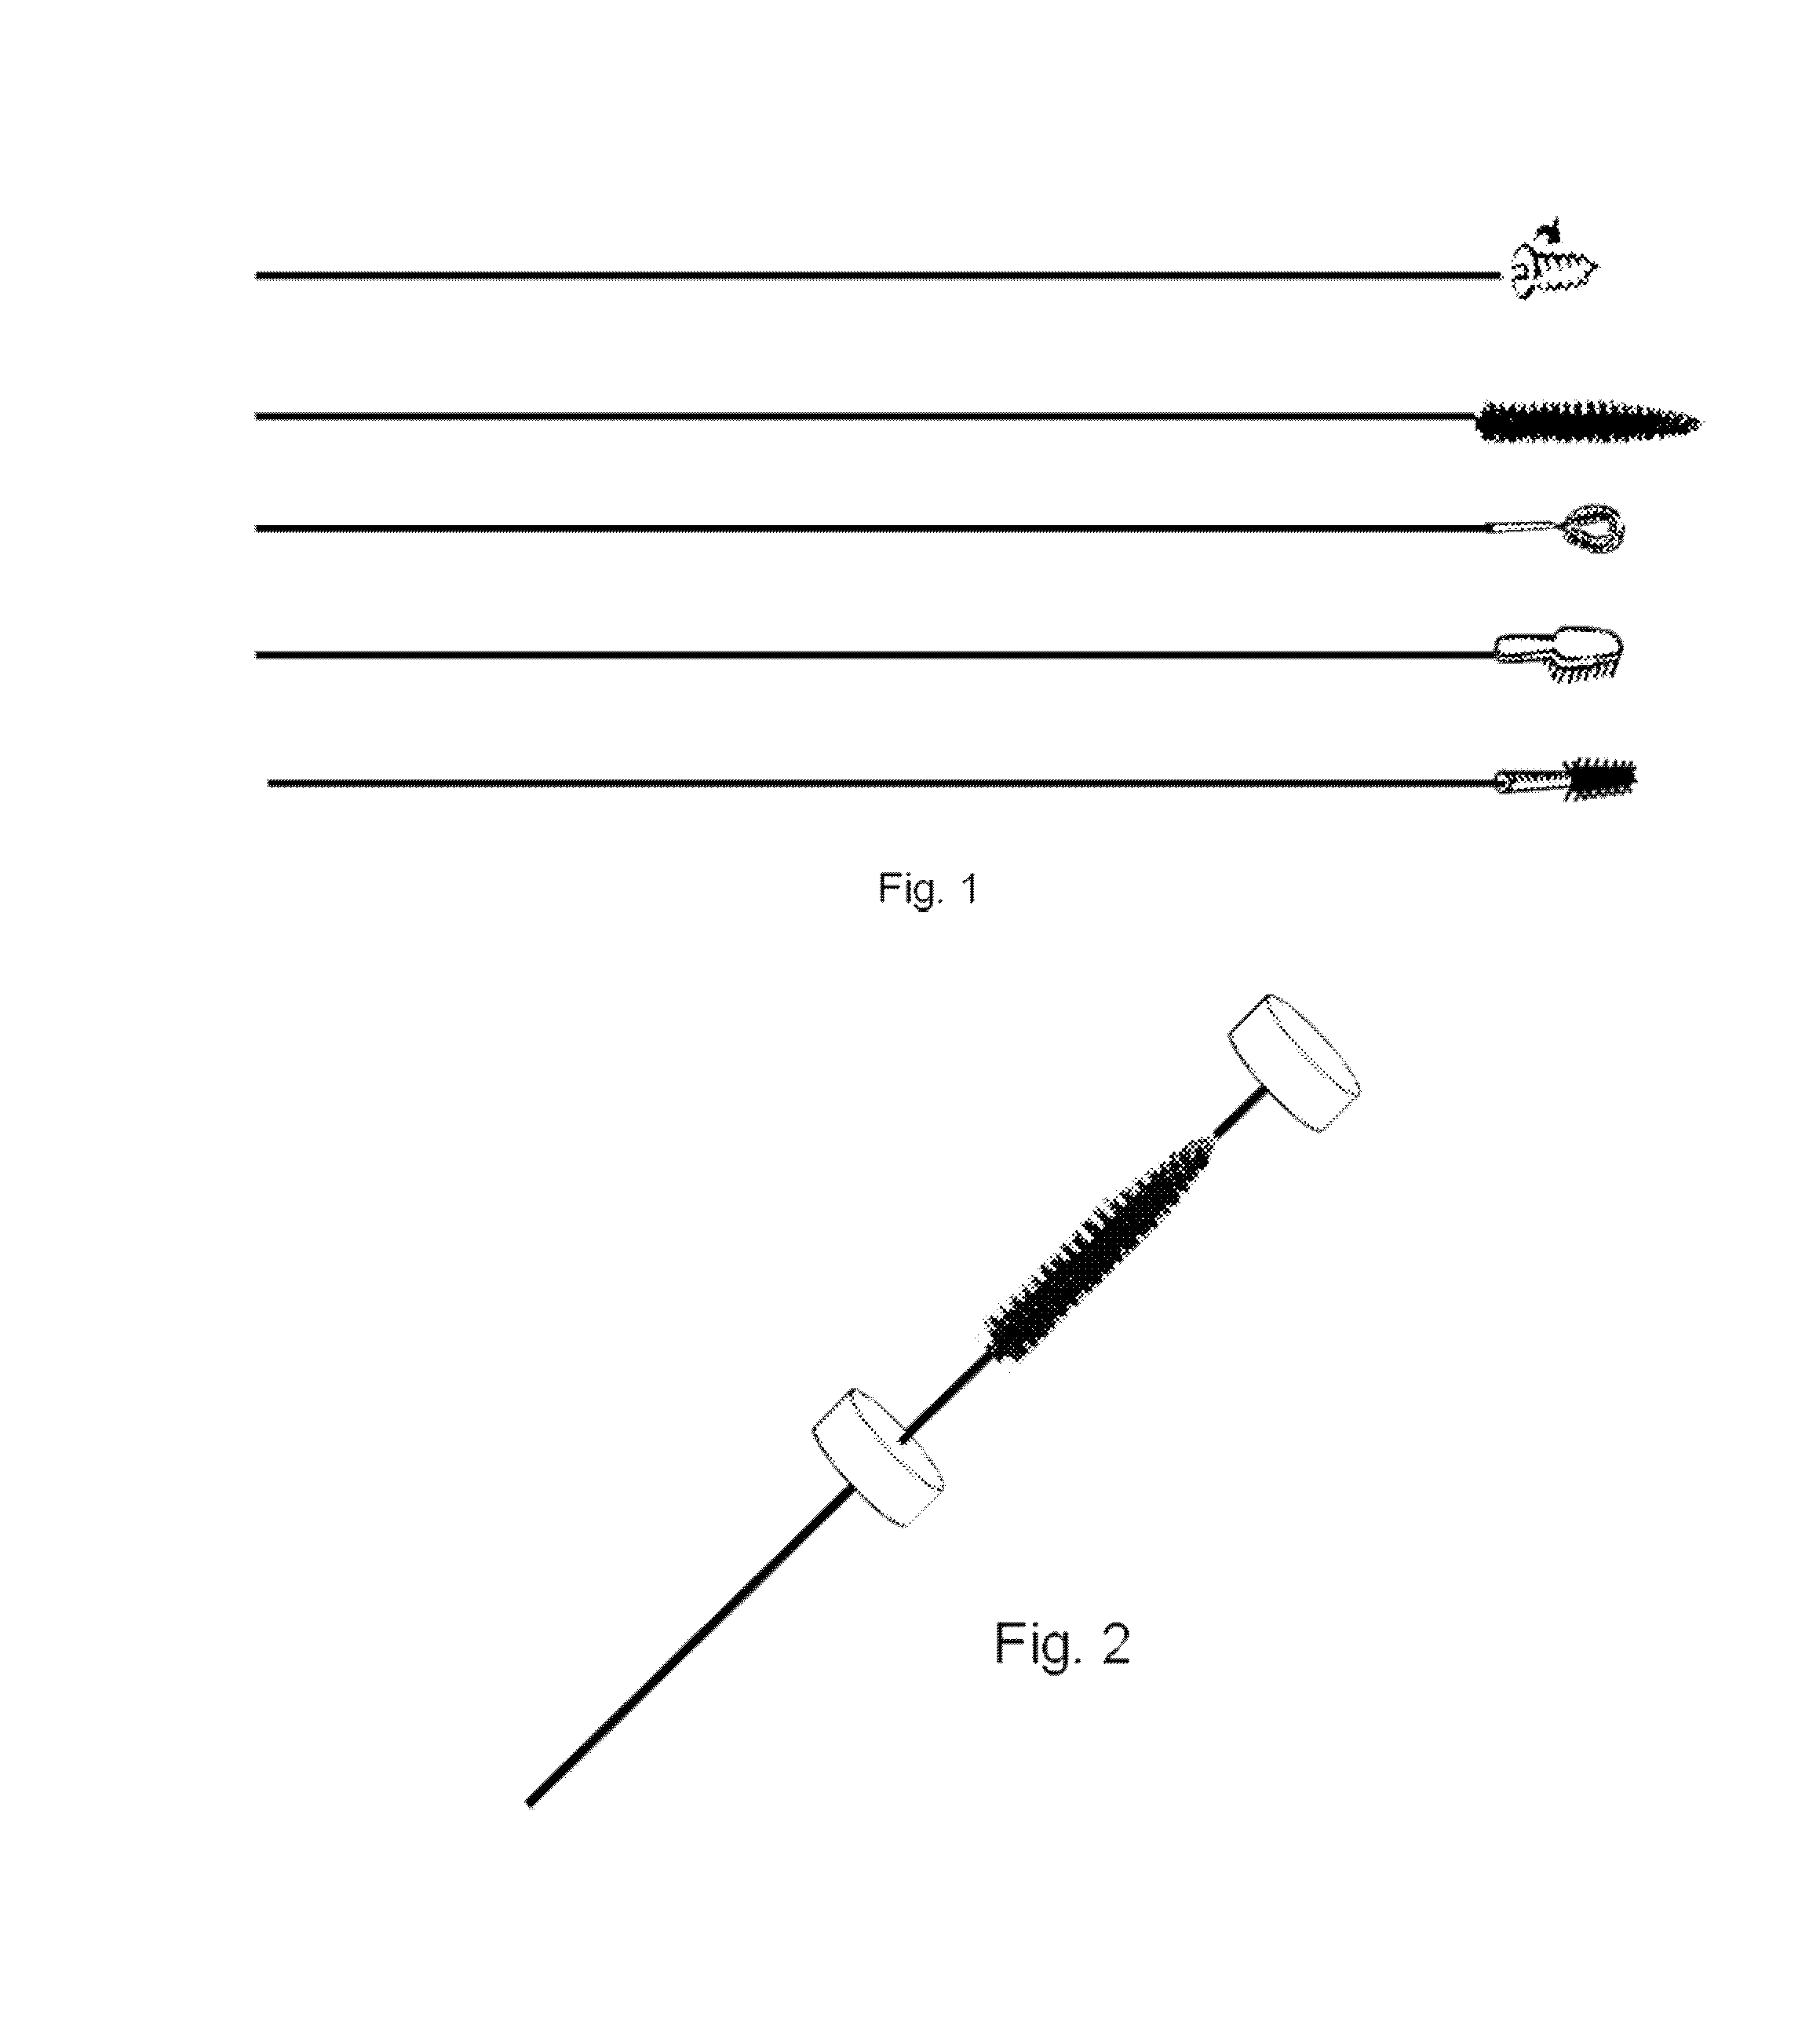 Simultaneous multiple method out-patient uterus biopsy device and method